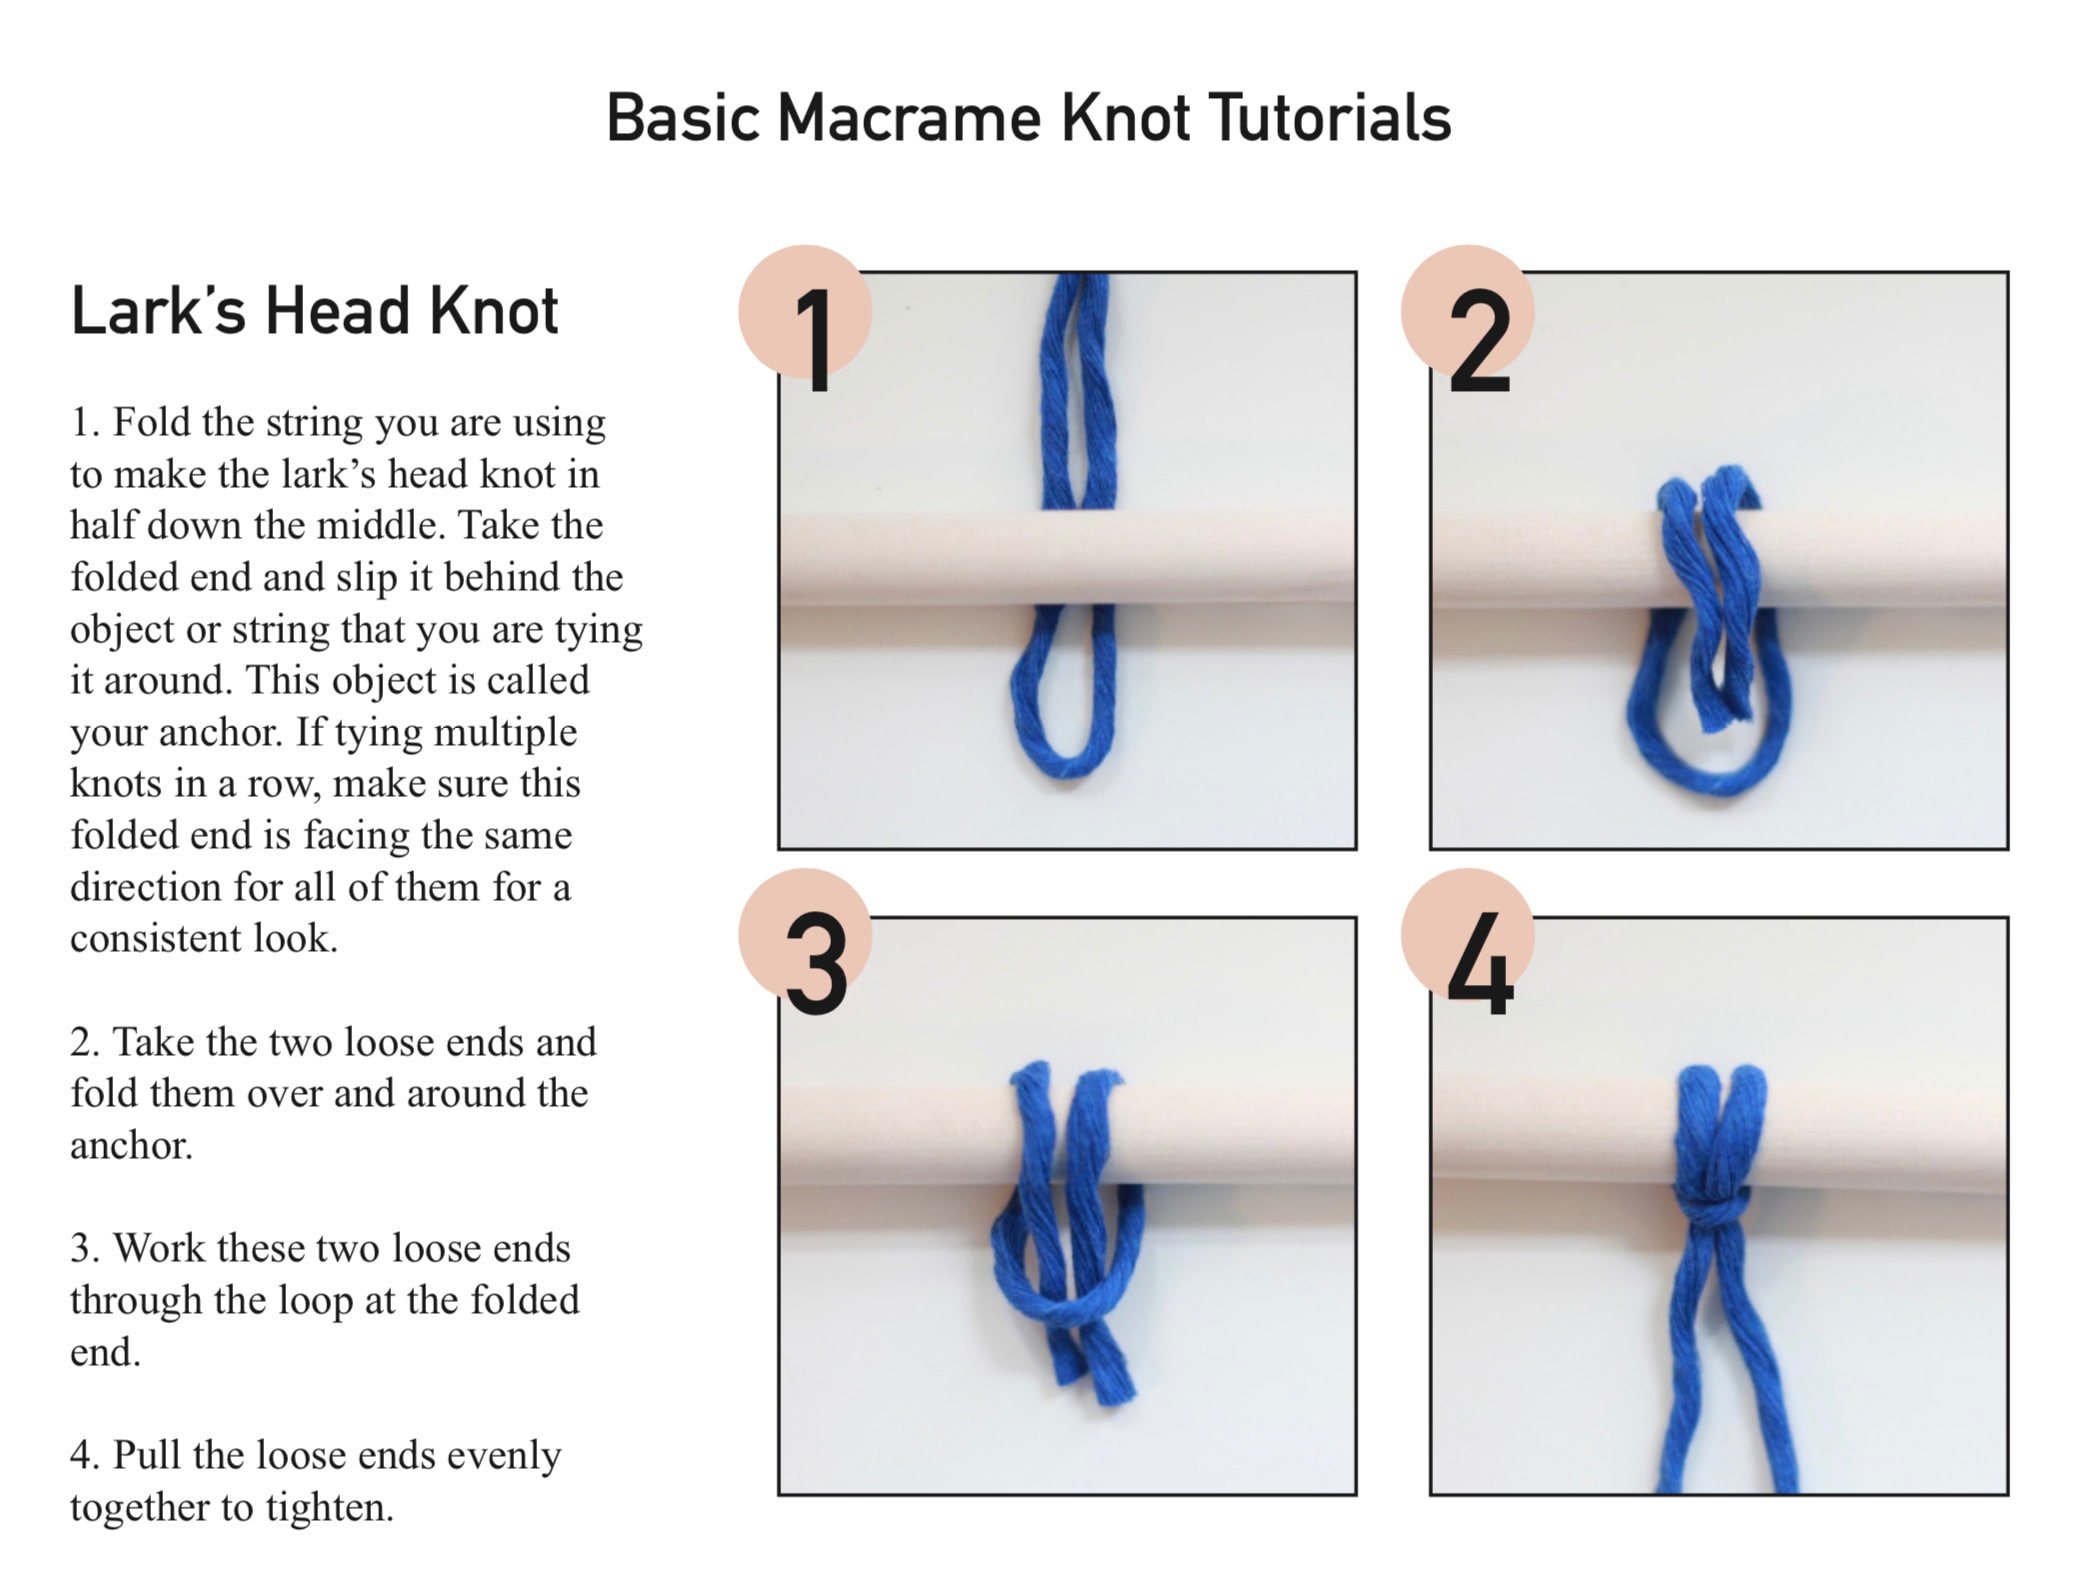 Different Kinds Of Macrame Knots | lupon.gov.ph